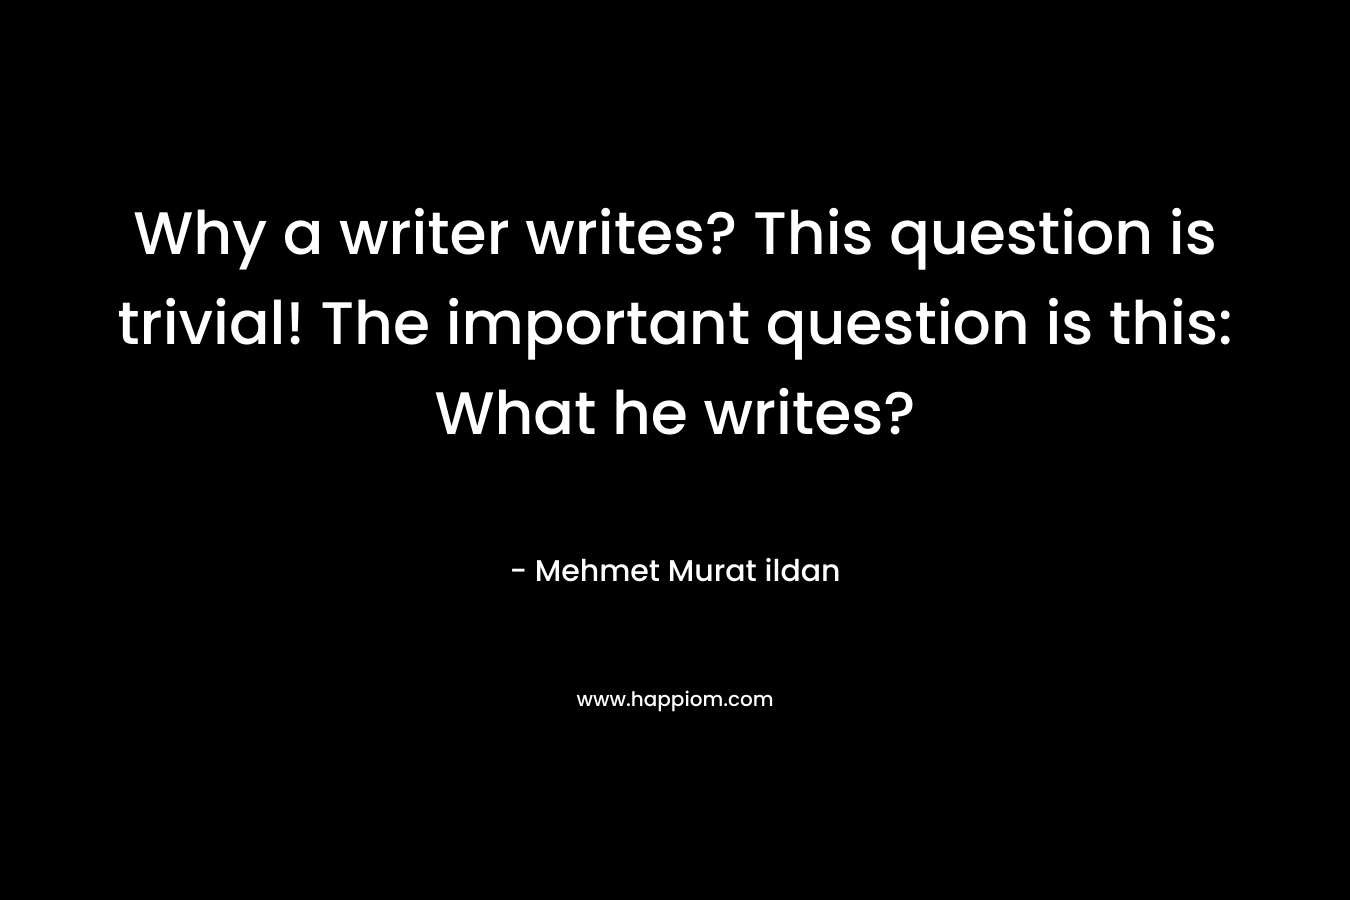 Why a writer writes? This question is trivial! The important question is this: What he writes?